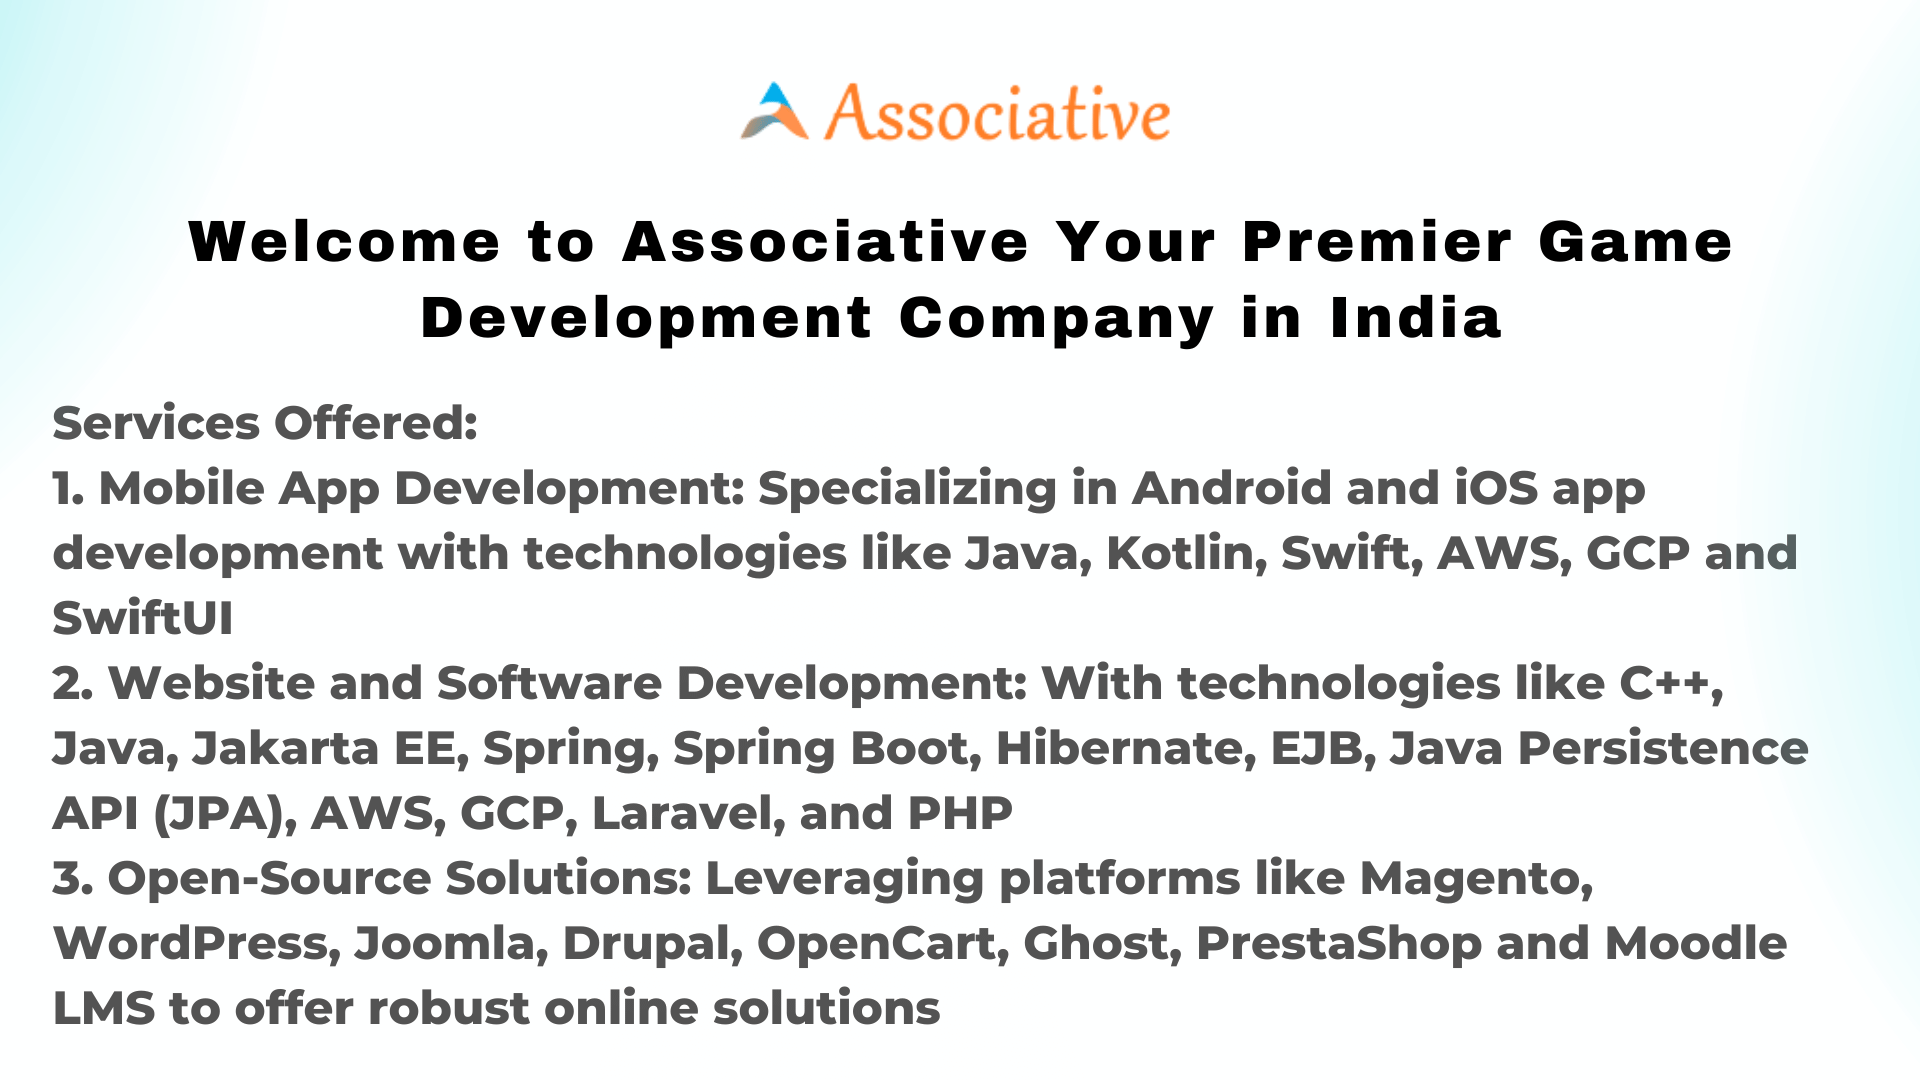 Welcome to Associative Your Premier Game Development Company in India